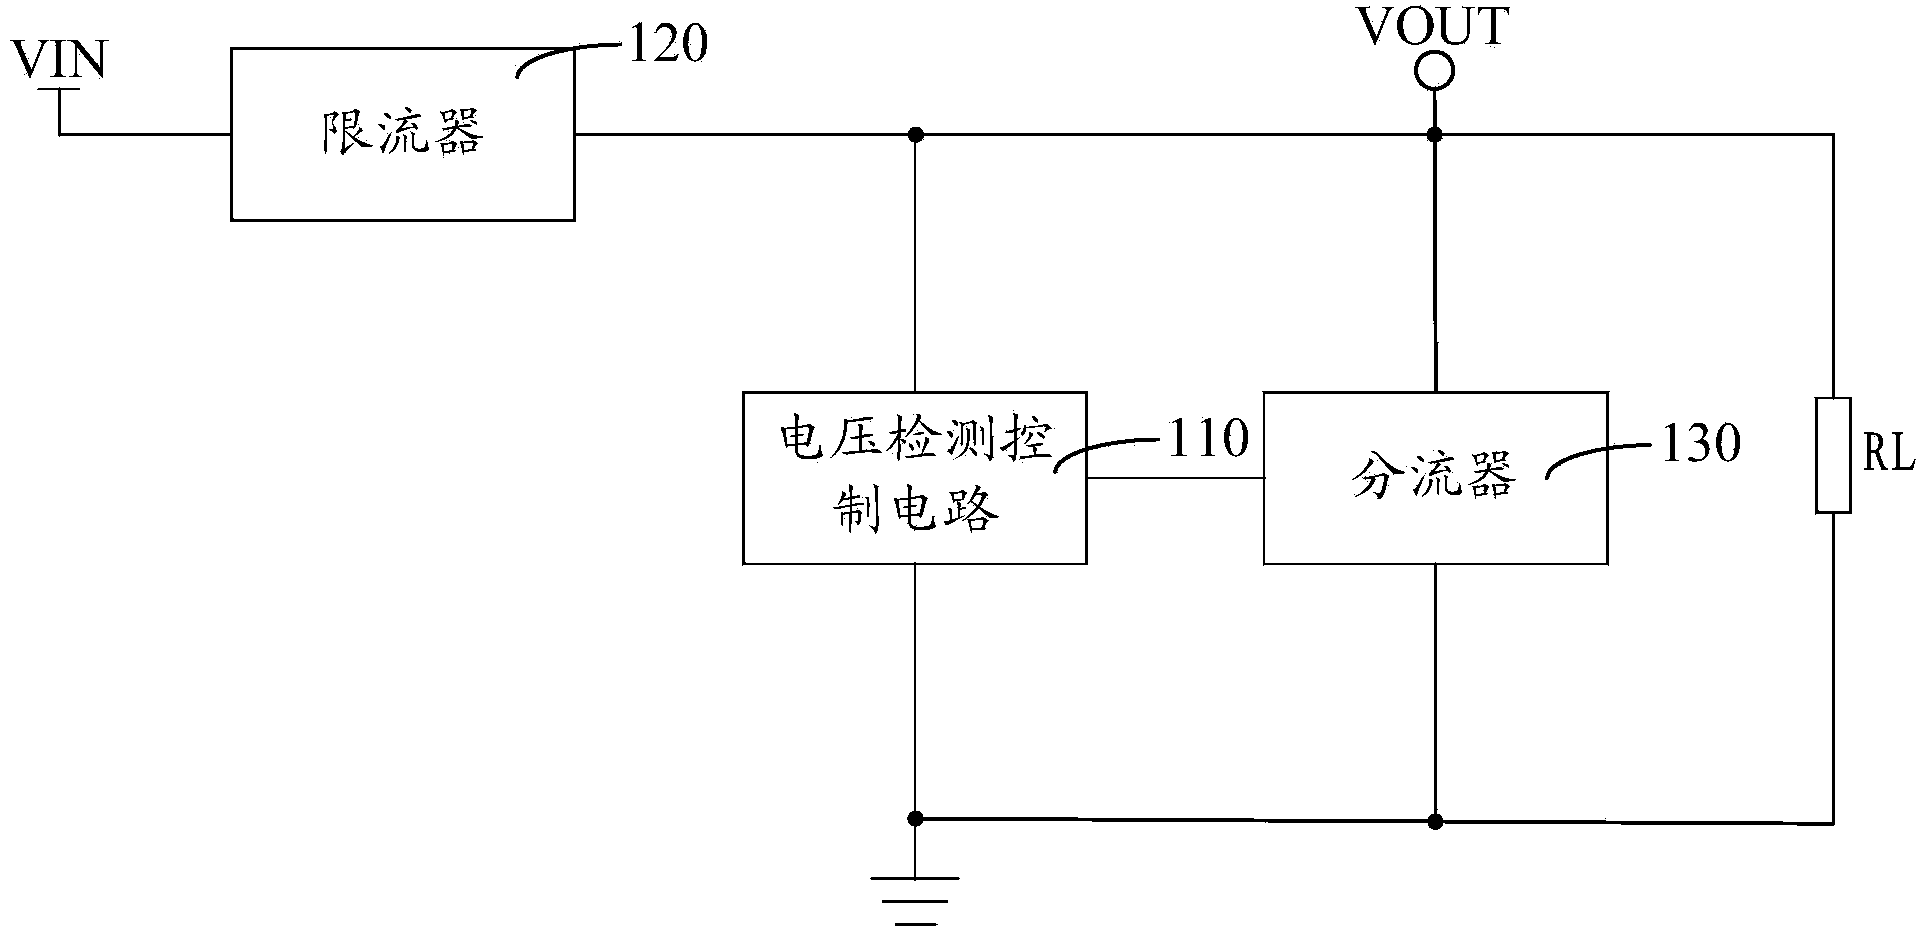 Protective device of equipment power source interface circuit